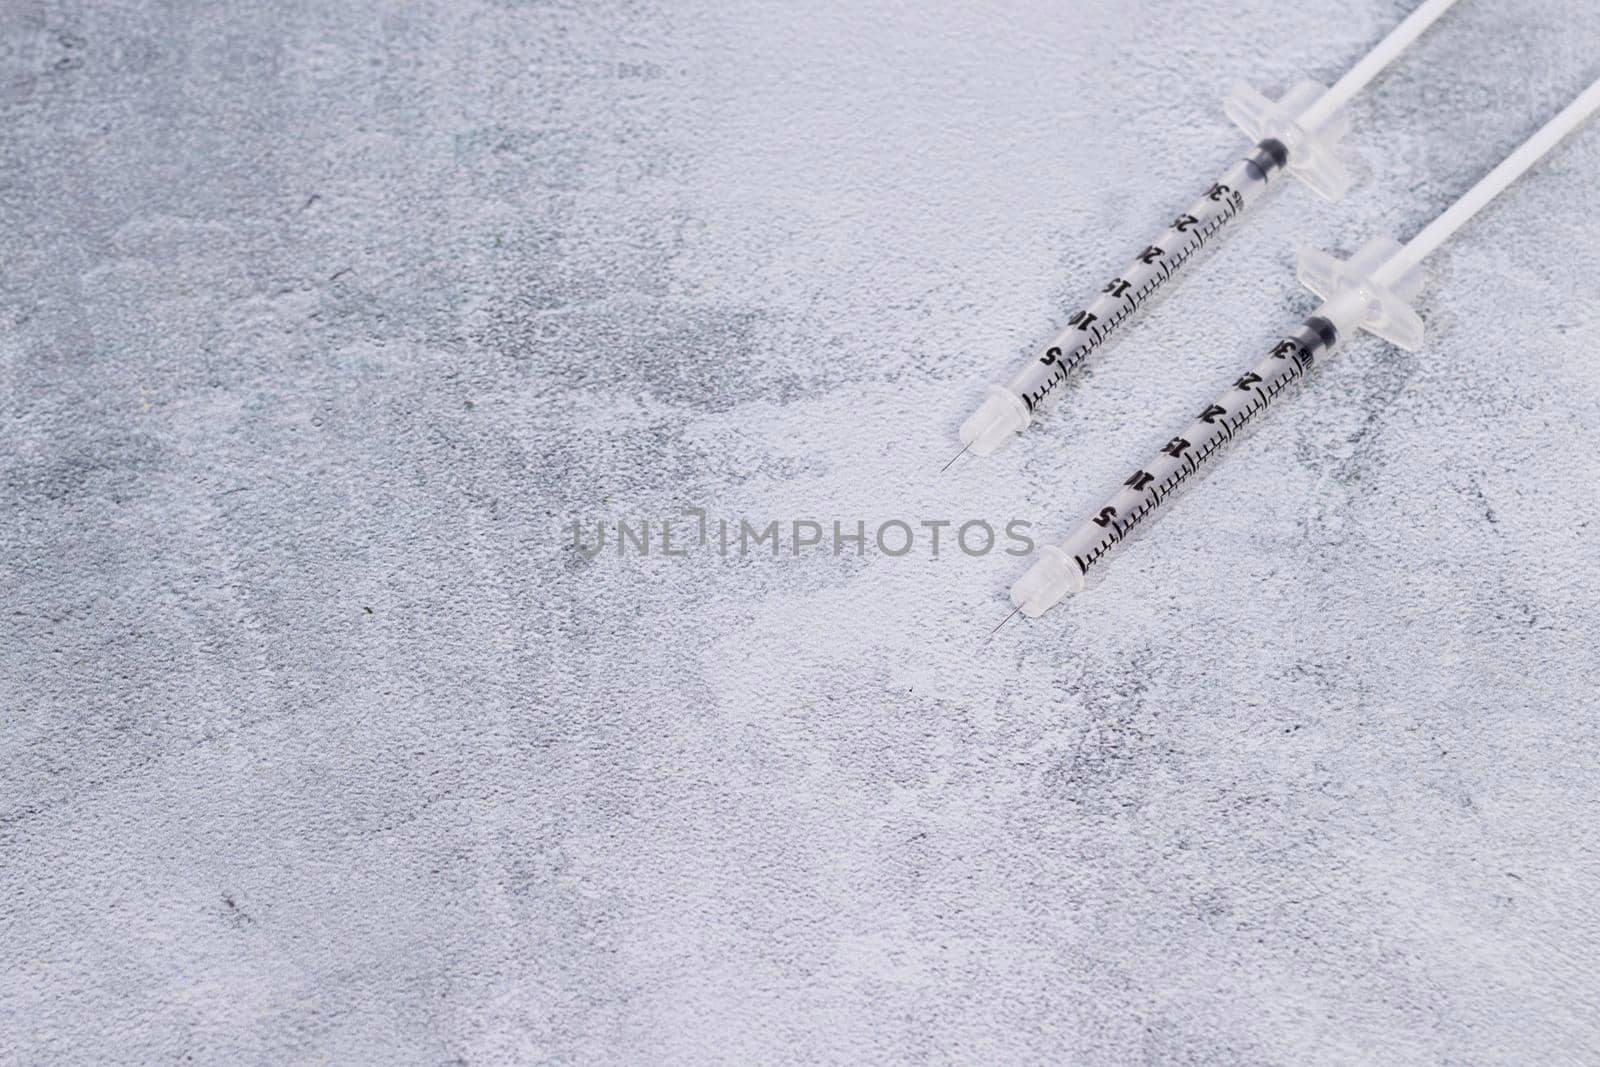 Two syringes on a gray marbled background